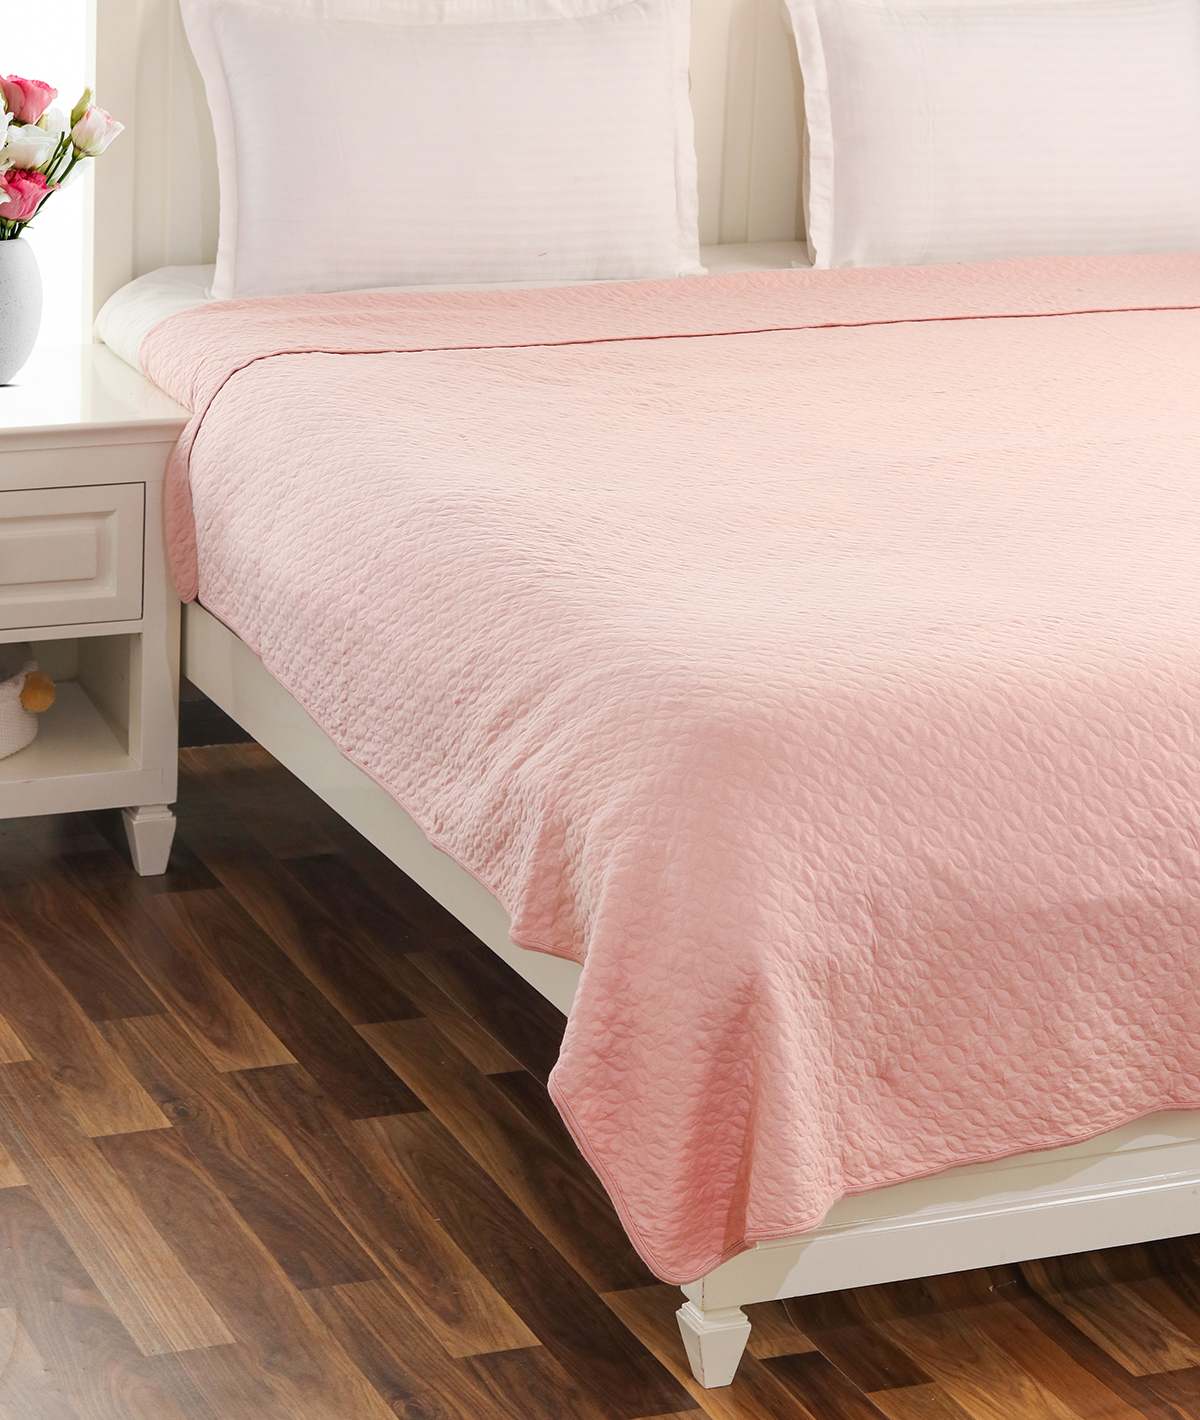 Double bed quilted blanket